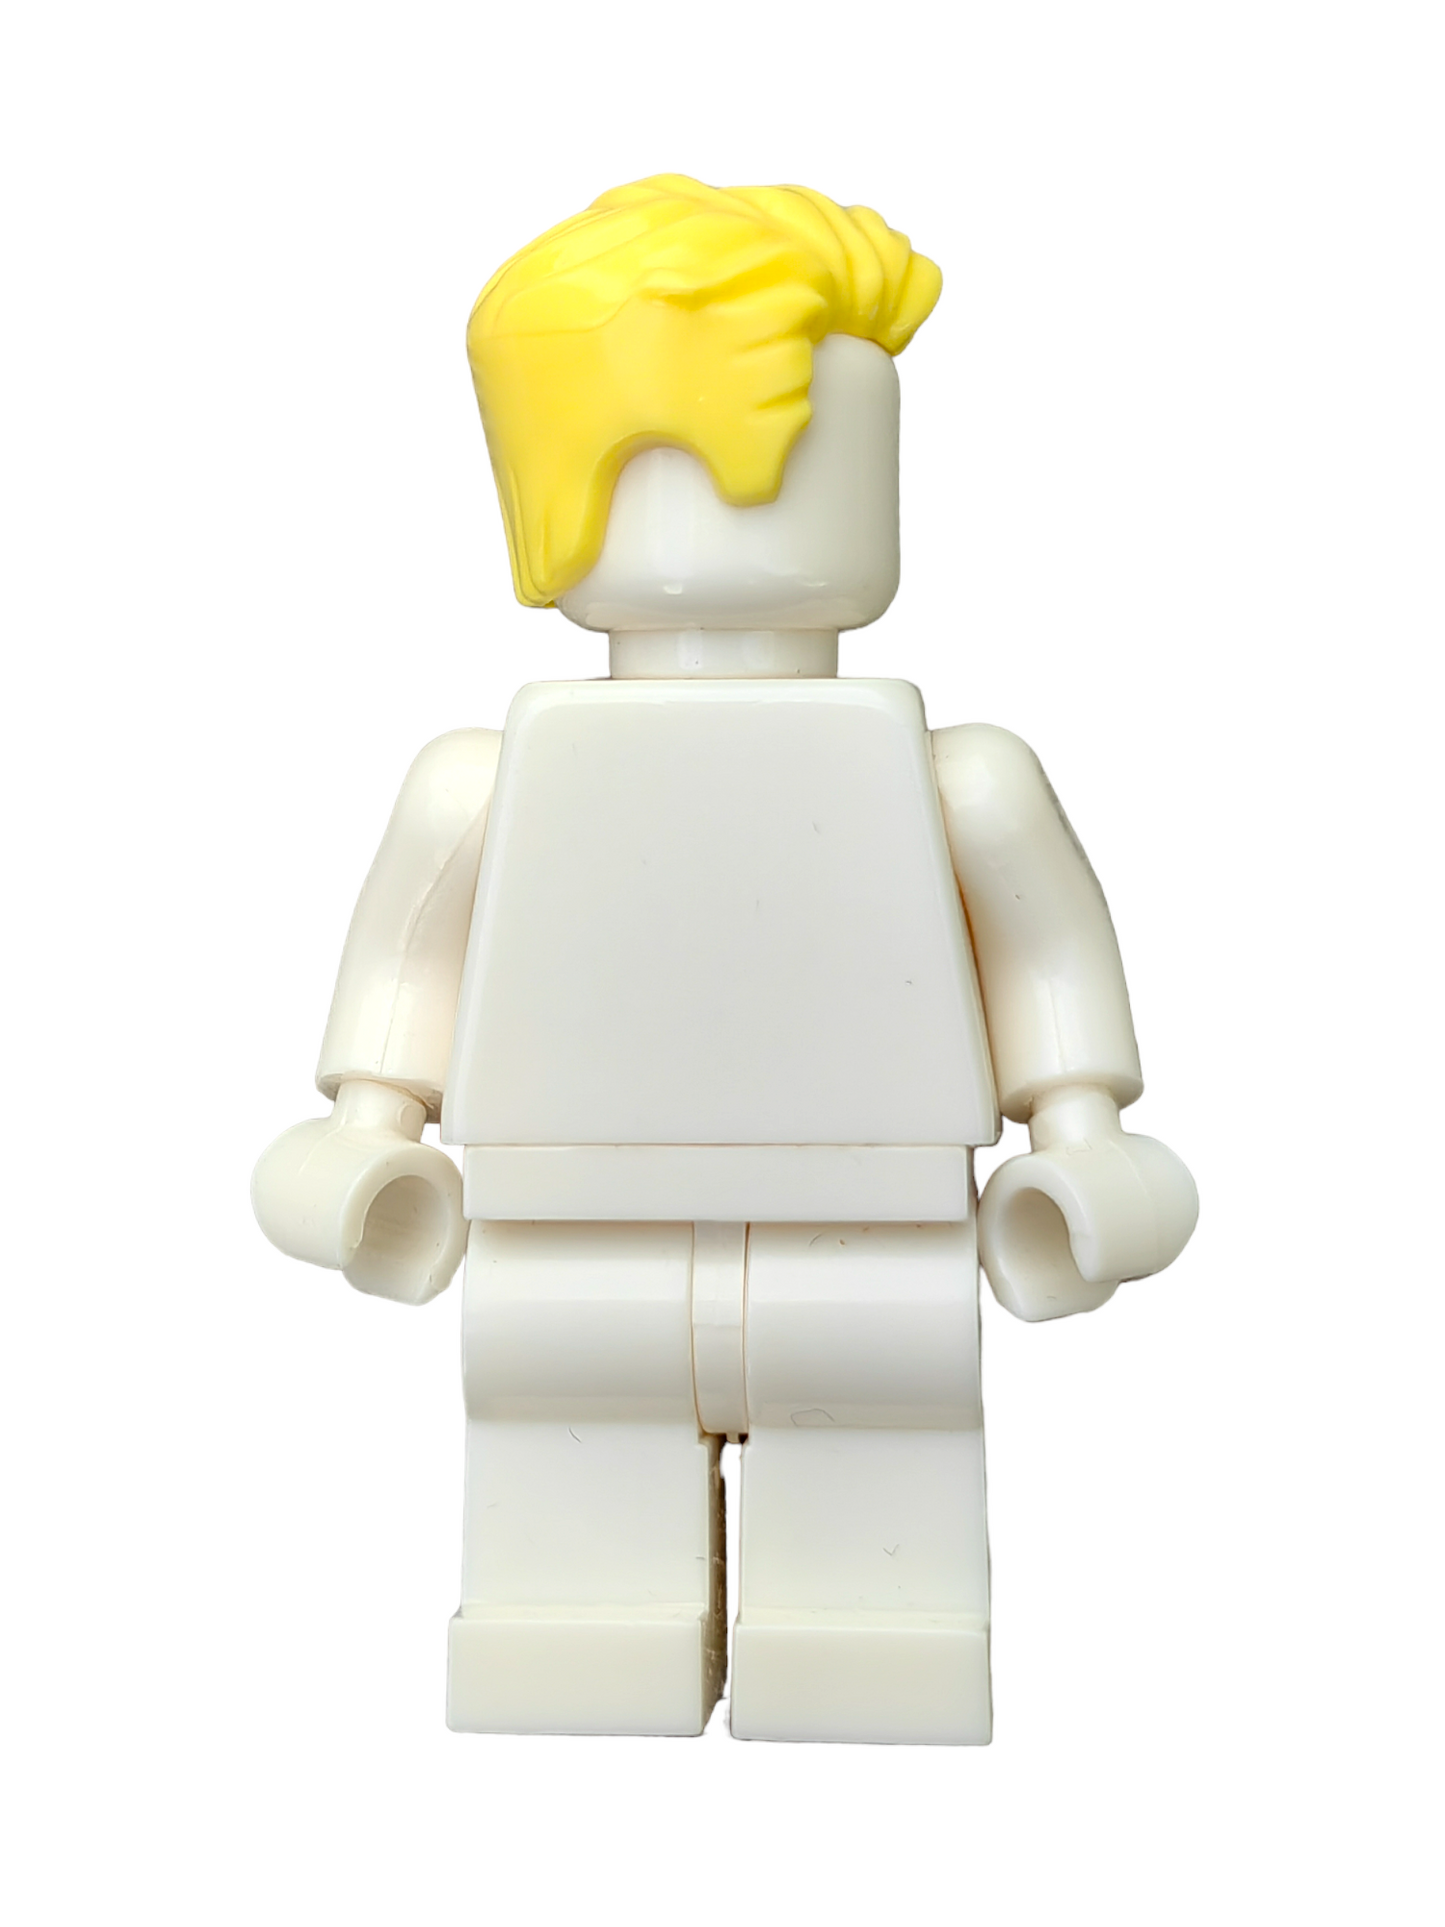 LEGO Wig, Yellow Hair Swept Left To the side with Slight Peak and Short Sideburns - UB1315